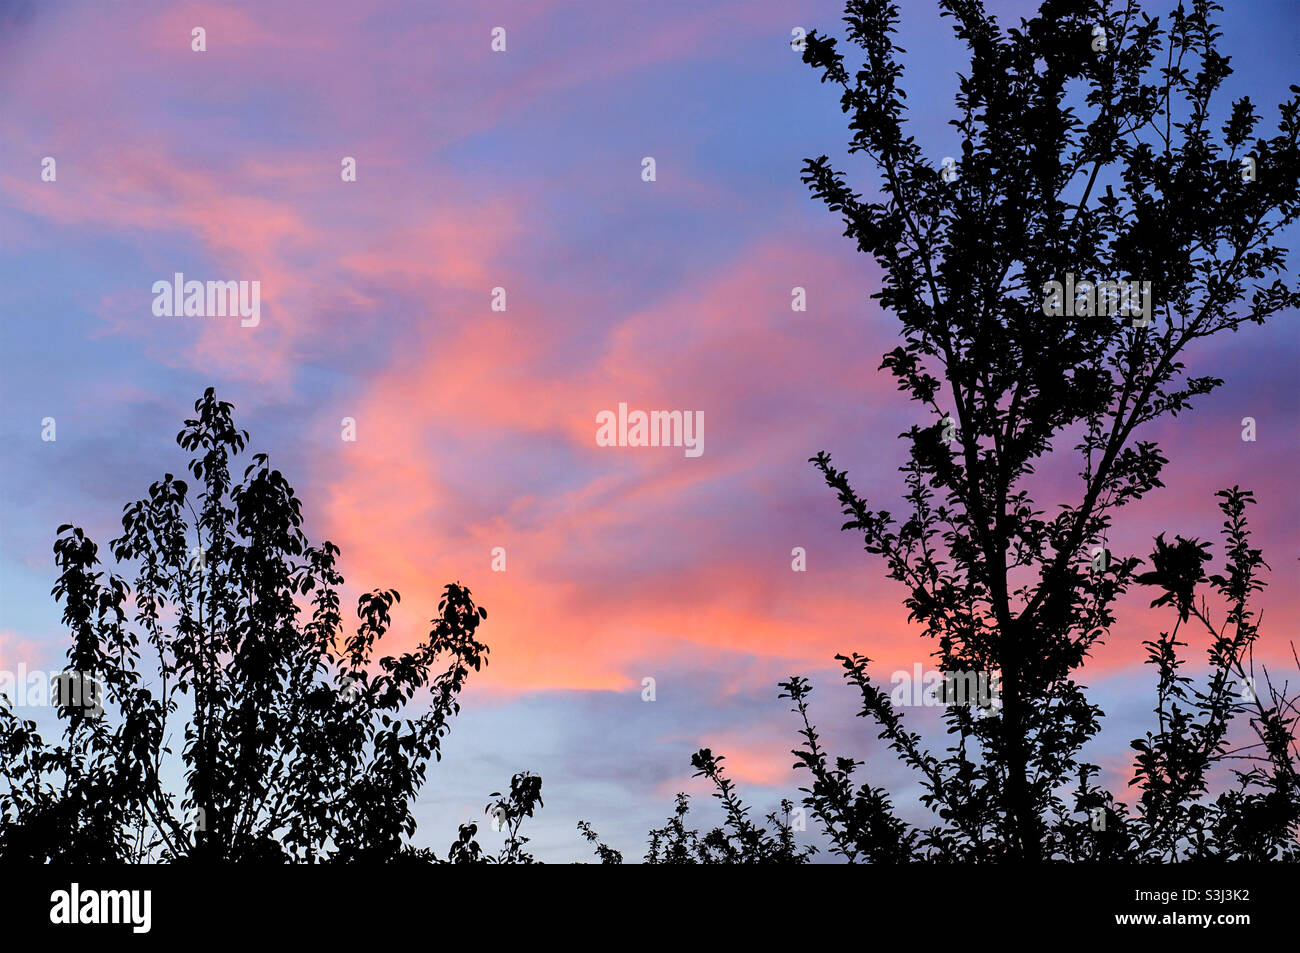 pink cloud at sunset and silhouettes of trees Stock Photo